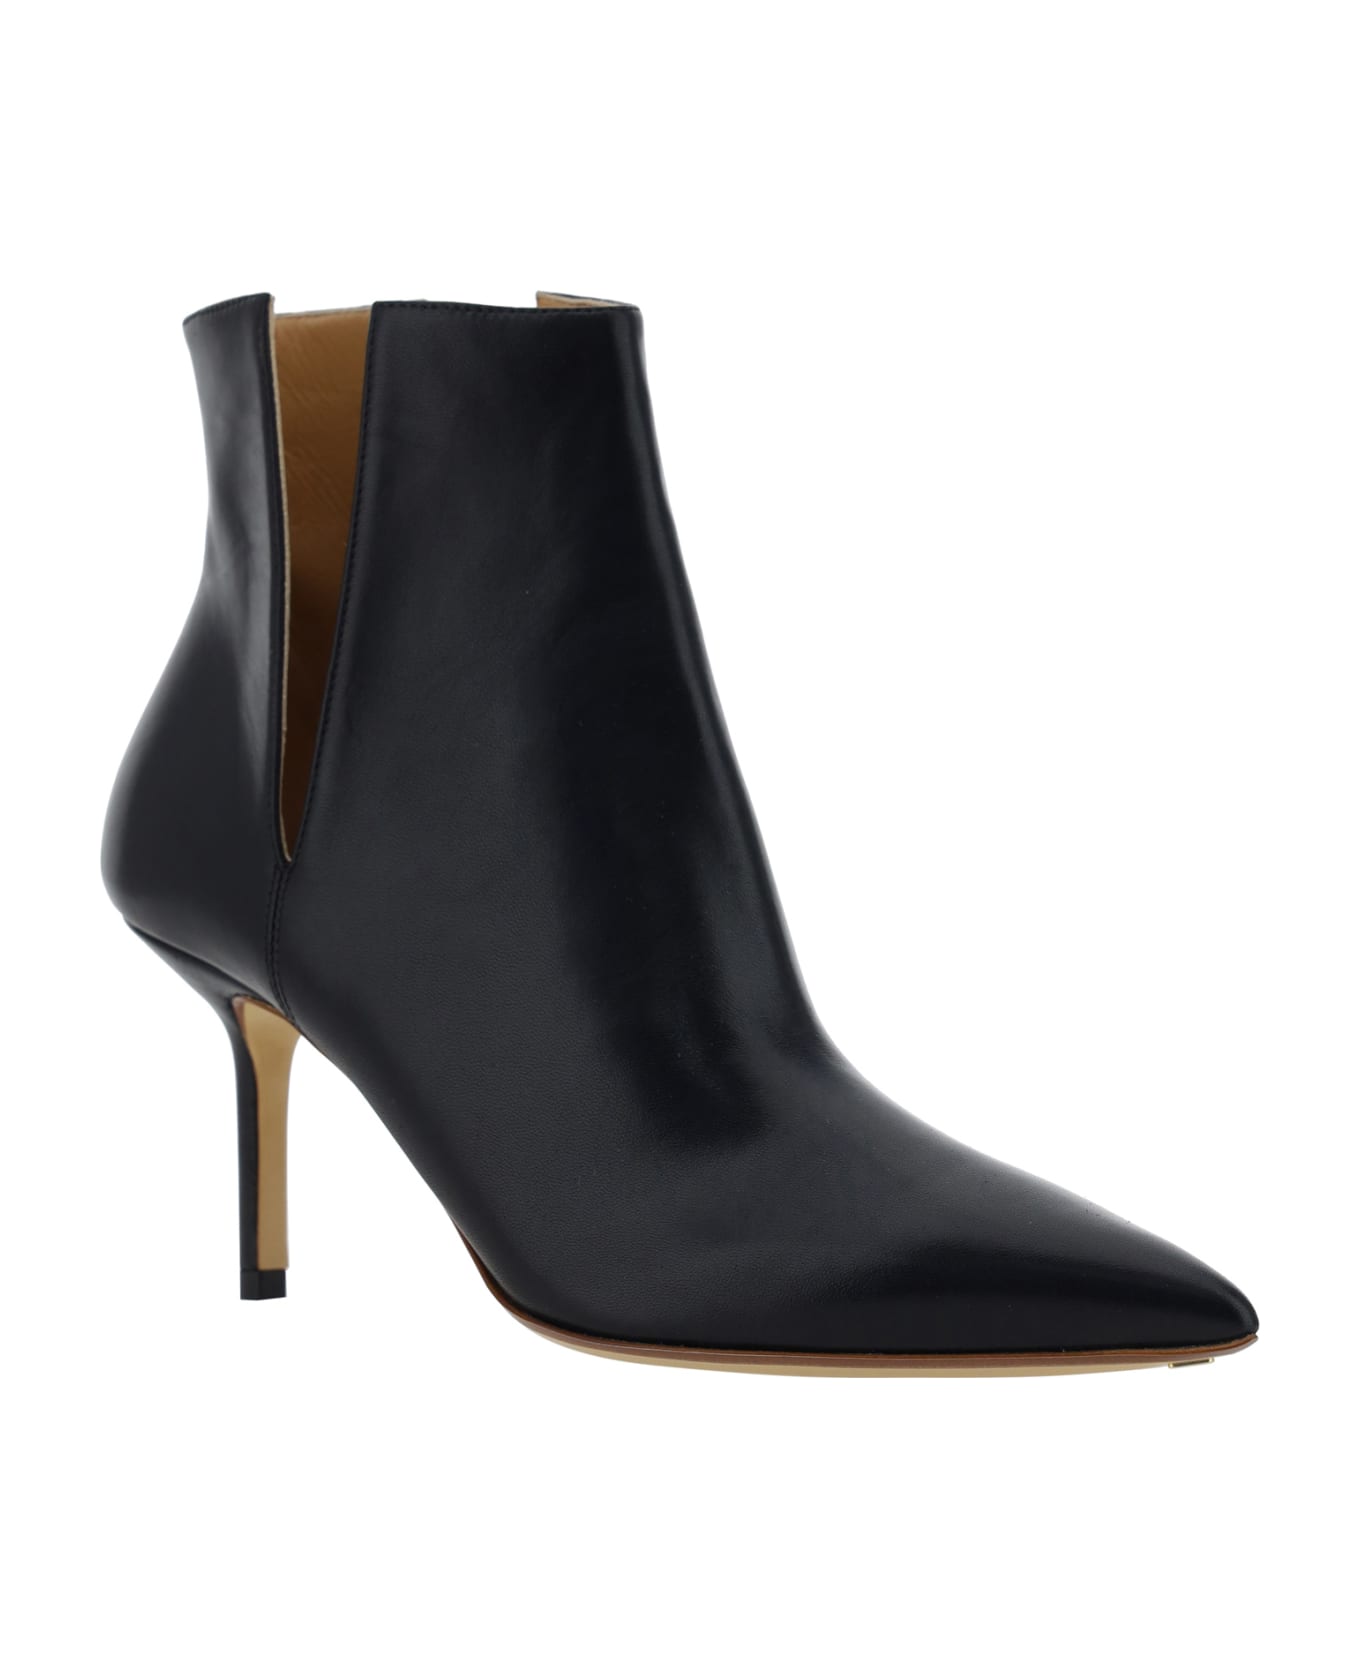 Francesco Russo Heeled Ankle Boots - Black ブーツ